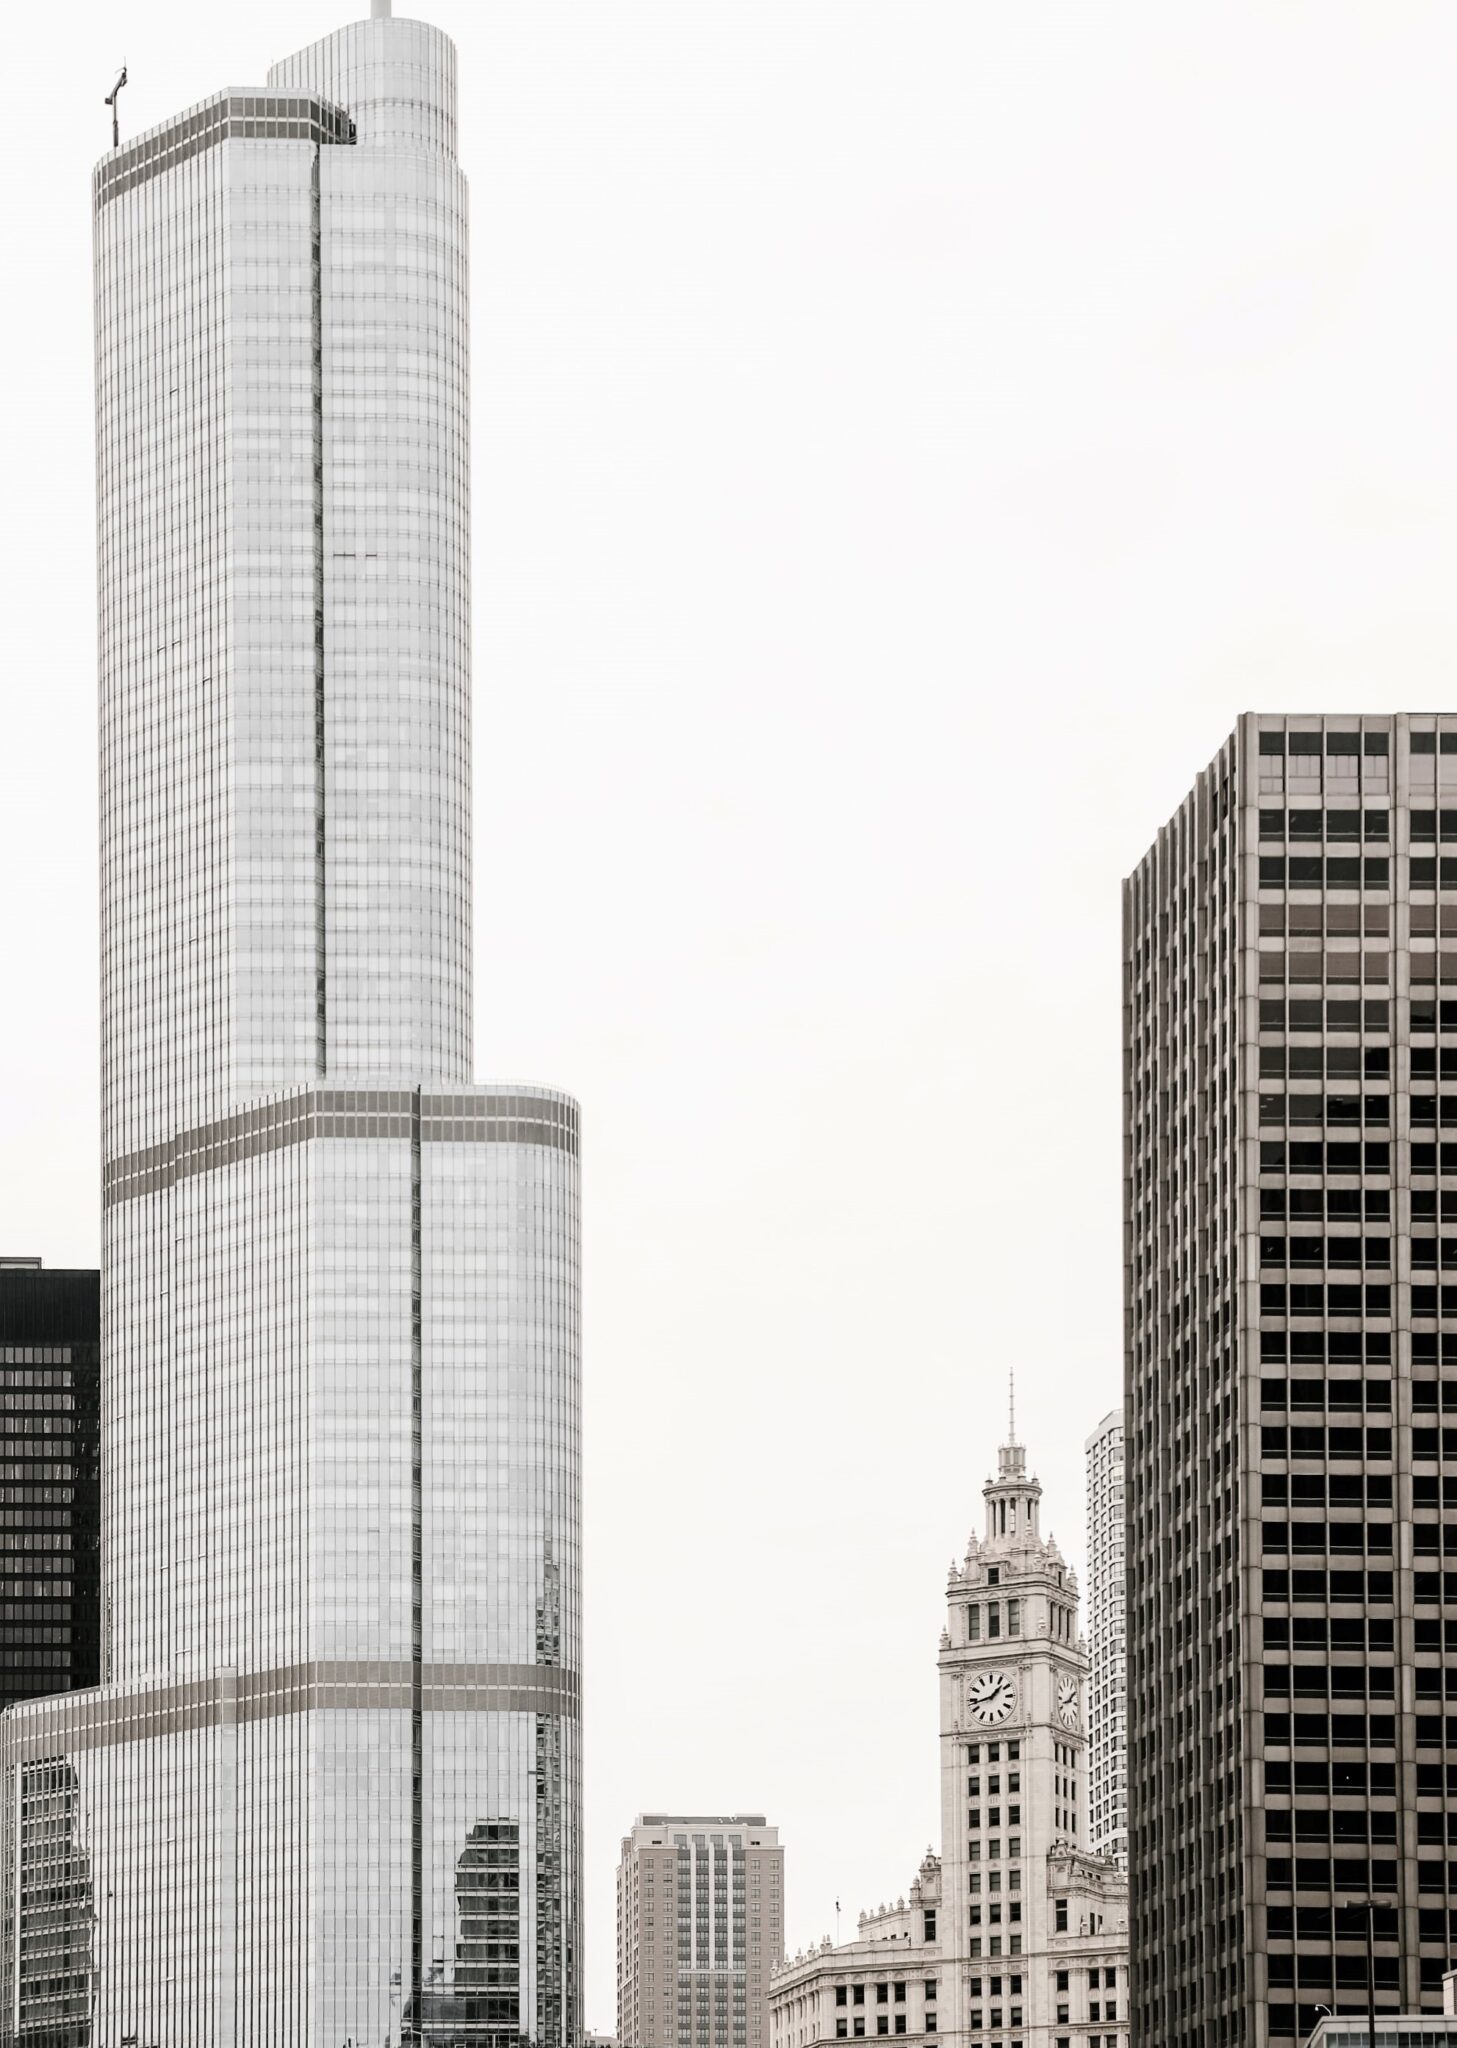 High-rise buildings in Chicago. In between is an old-school building. This article covers must-include items in your Midwest travel bucket list.